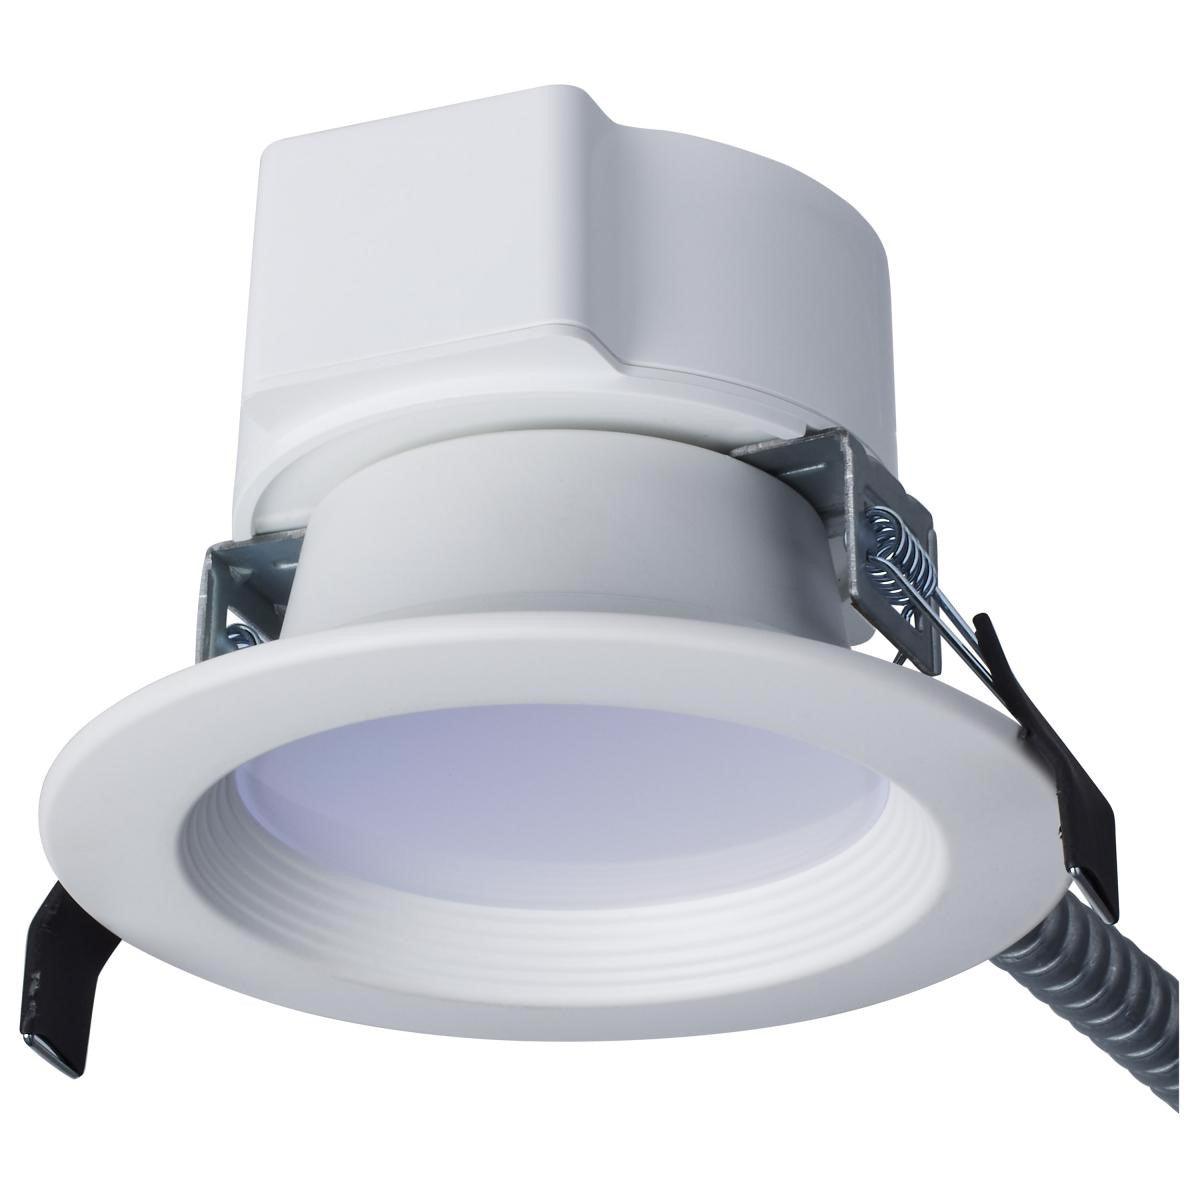 4 Inch Commercial LED Downlight, Round, 12 Watt, 1200 Lumens, Selectable CCT, 2700K to 5000K, Baffle Trim - Bees Lighting